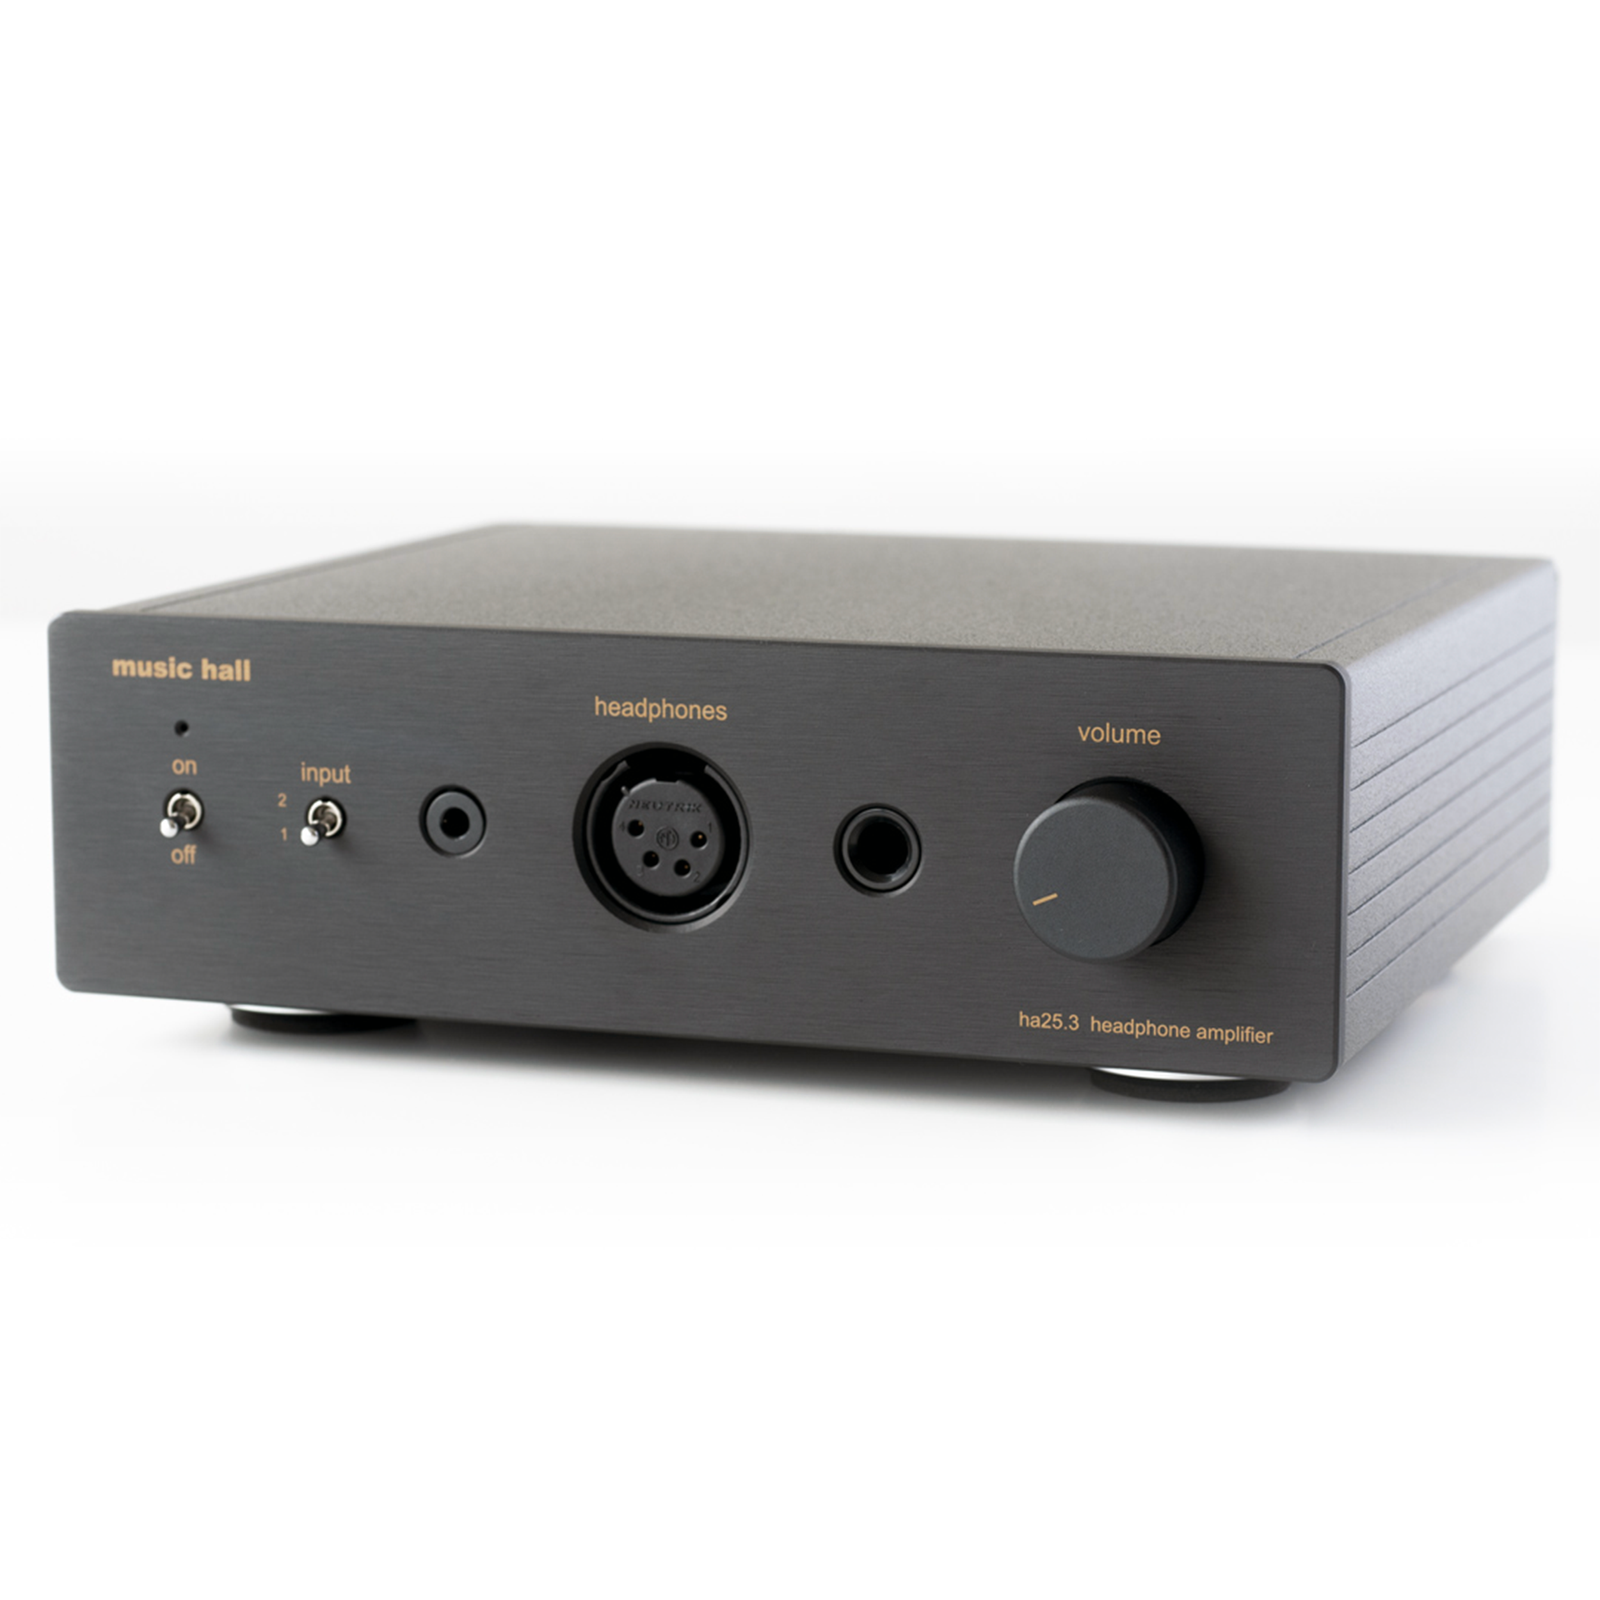 Product Highlights: Fully balanced headphone amplifier 2 x line-level inputs Tube pre-amp & solid-state amp hybrid design 2 x Philips JAN tubes, type 6112 3 x headphone outputs; 3.5 mm, ¼ in., and balanced XLR 2 x analog outputs; 1 pair RCA fixed, 1 pair RCA variable Differential tube input amplification stage Discrete output buffer High output power for the best sound experience